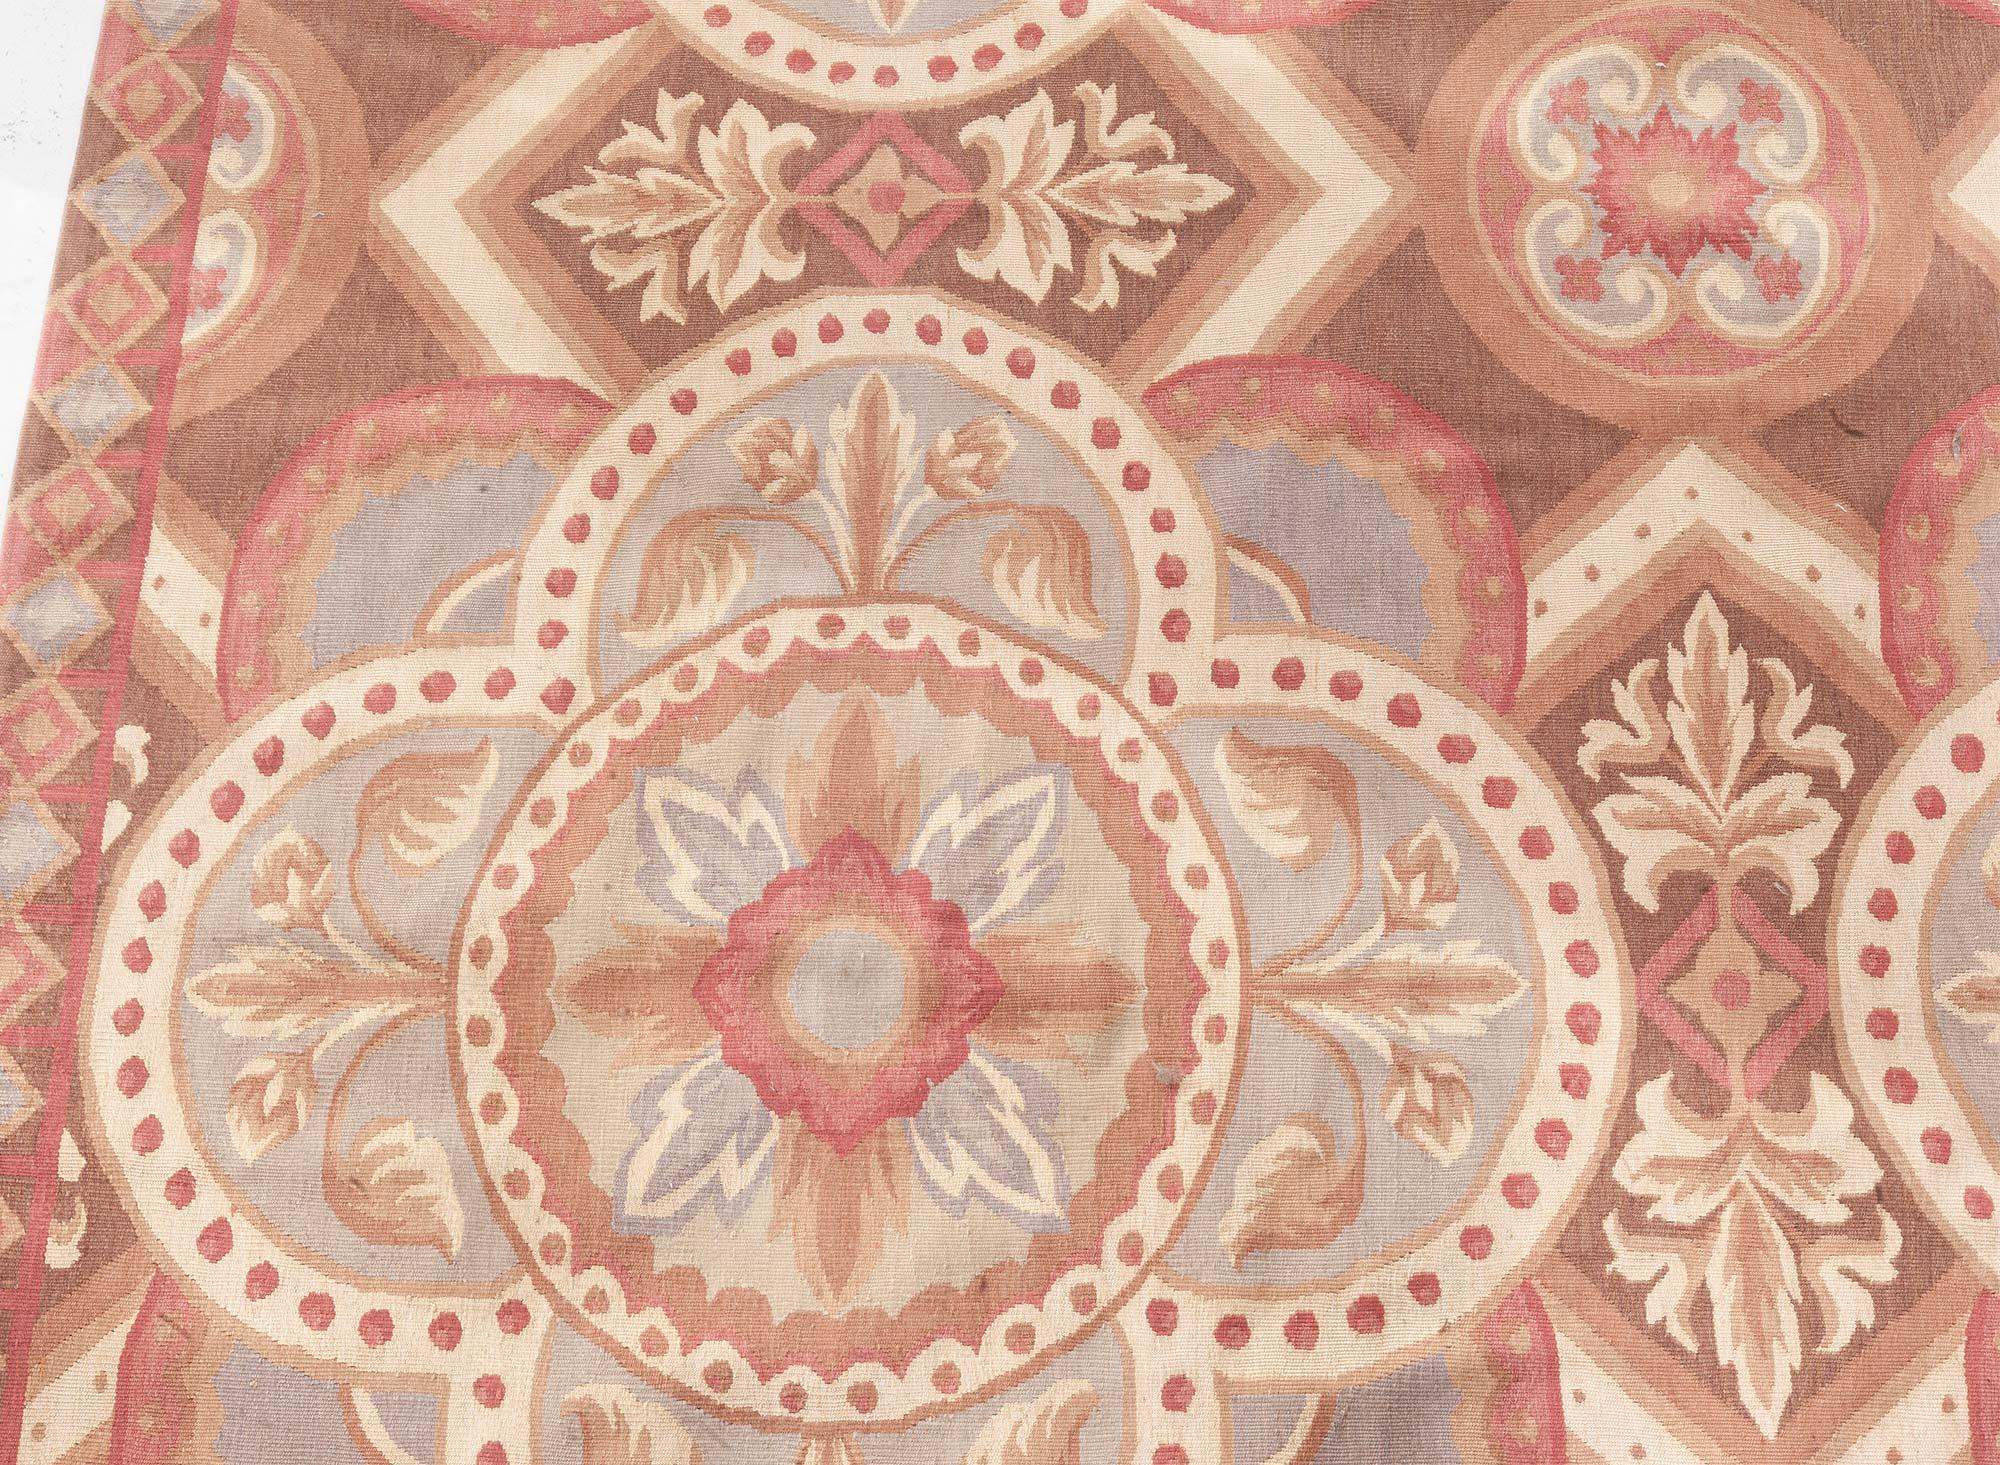 Traditional Inspired Aubusson Rug
Size: 9'0